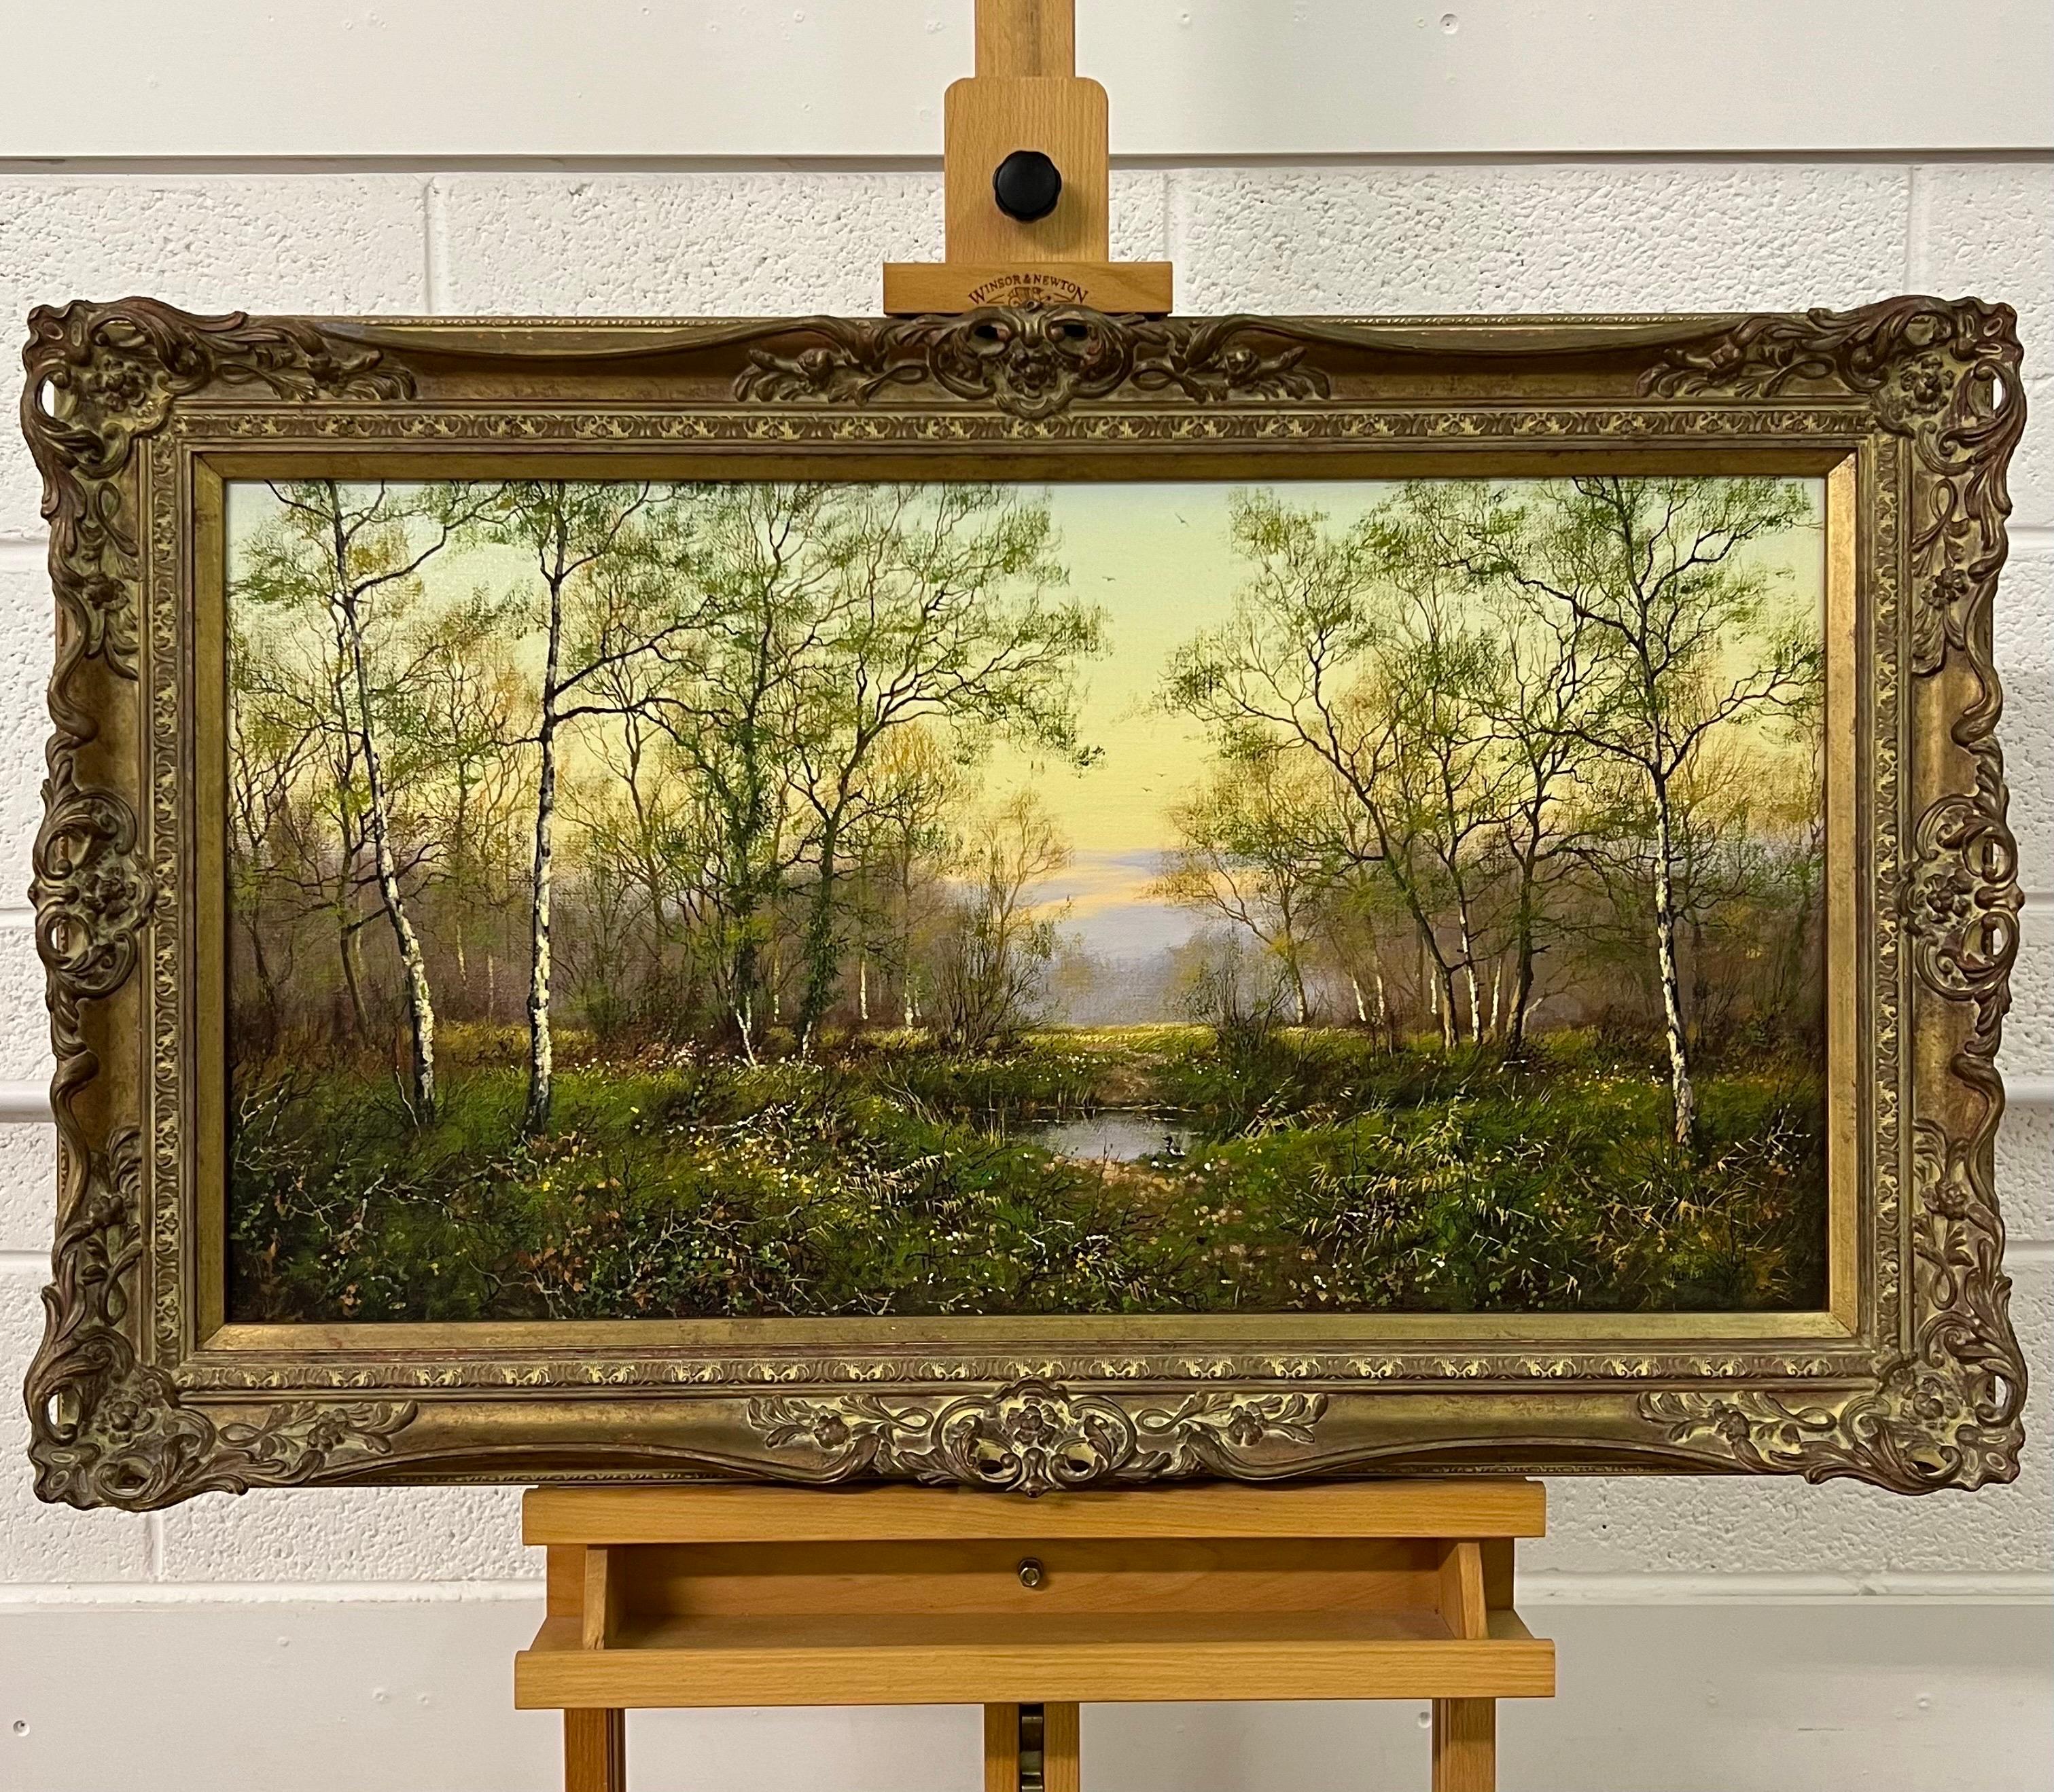 Oil Painting of a Woodland Scene in the English Countryside by 20th Century Modern British Artist, James Wright 

Art measures 30 x 16 inches
Frame measures 36 x 22 inches 

This 1980's vintage painting depicts a clearing in a forest in England in